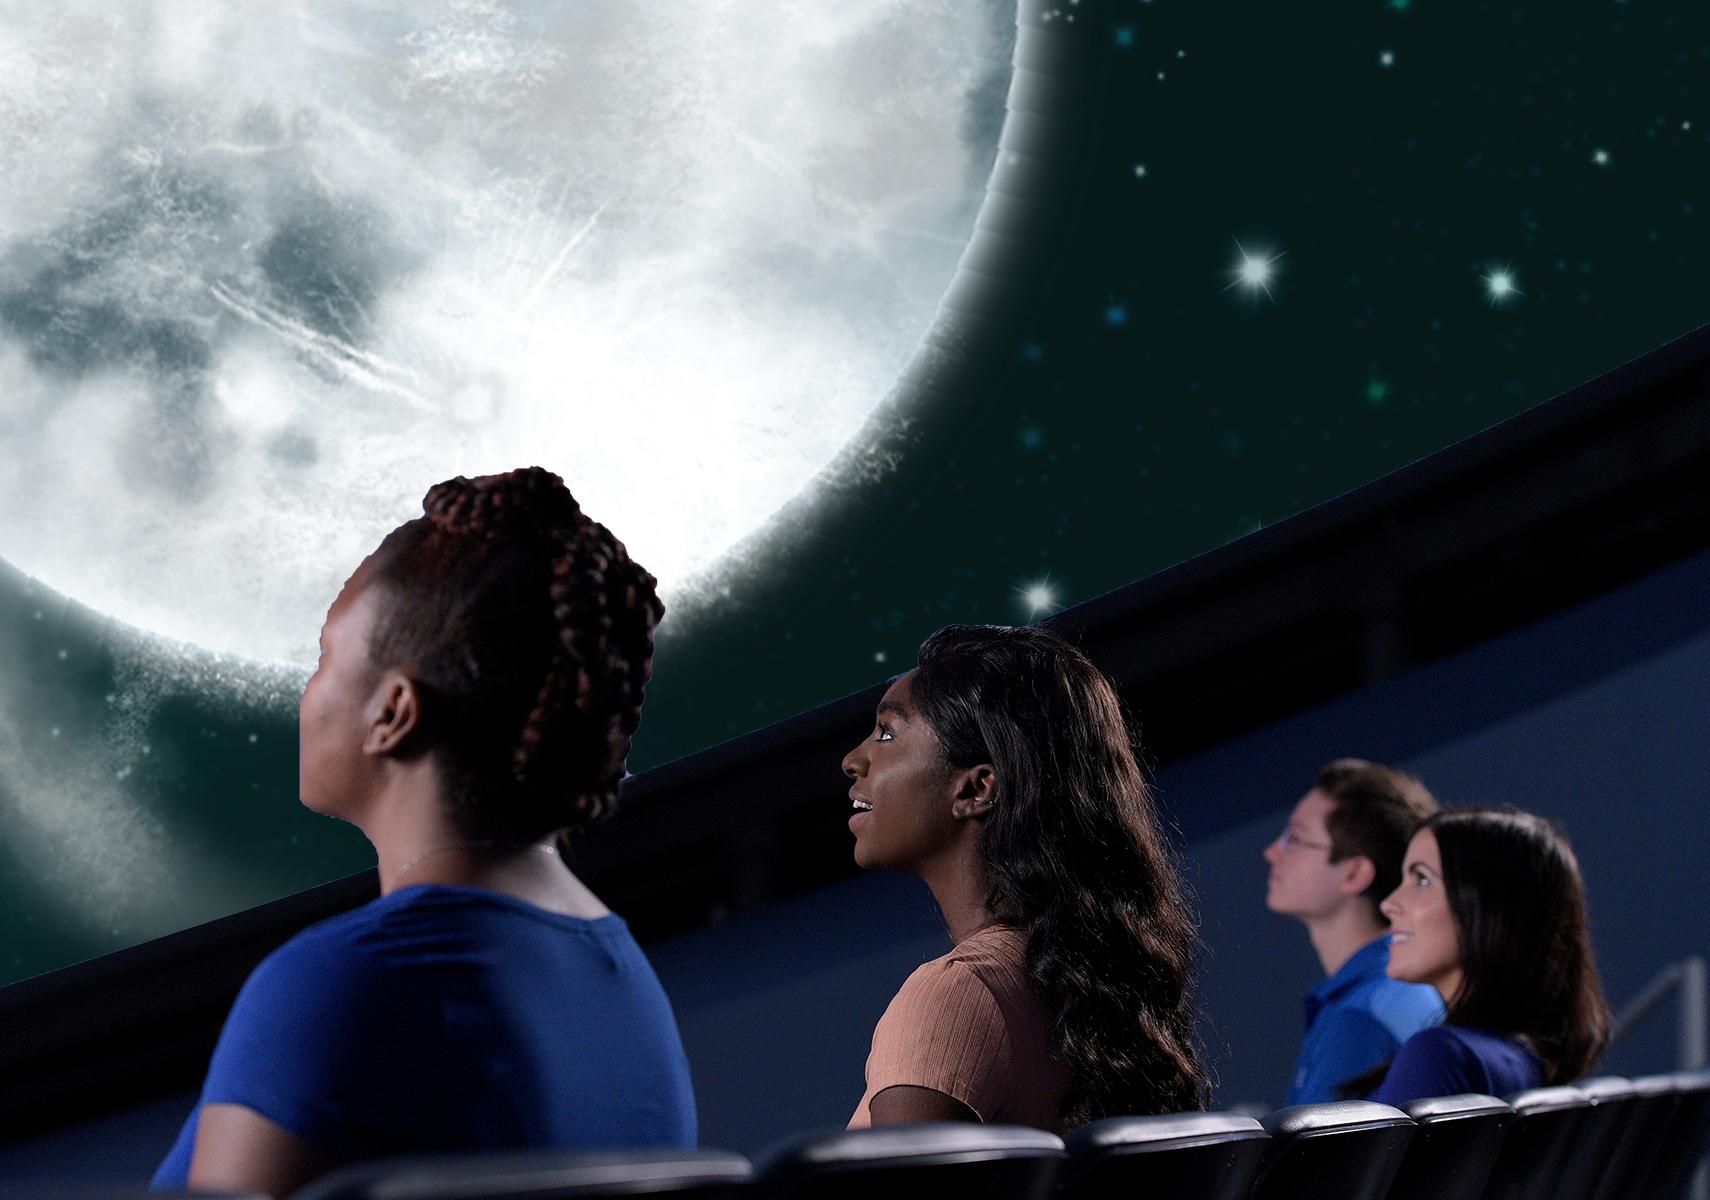 Individuals seated in theater looking up at an image of the moon